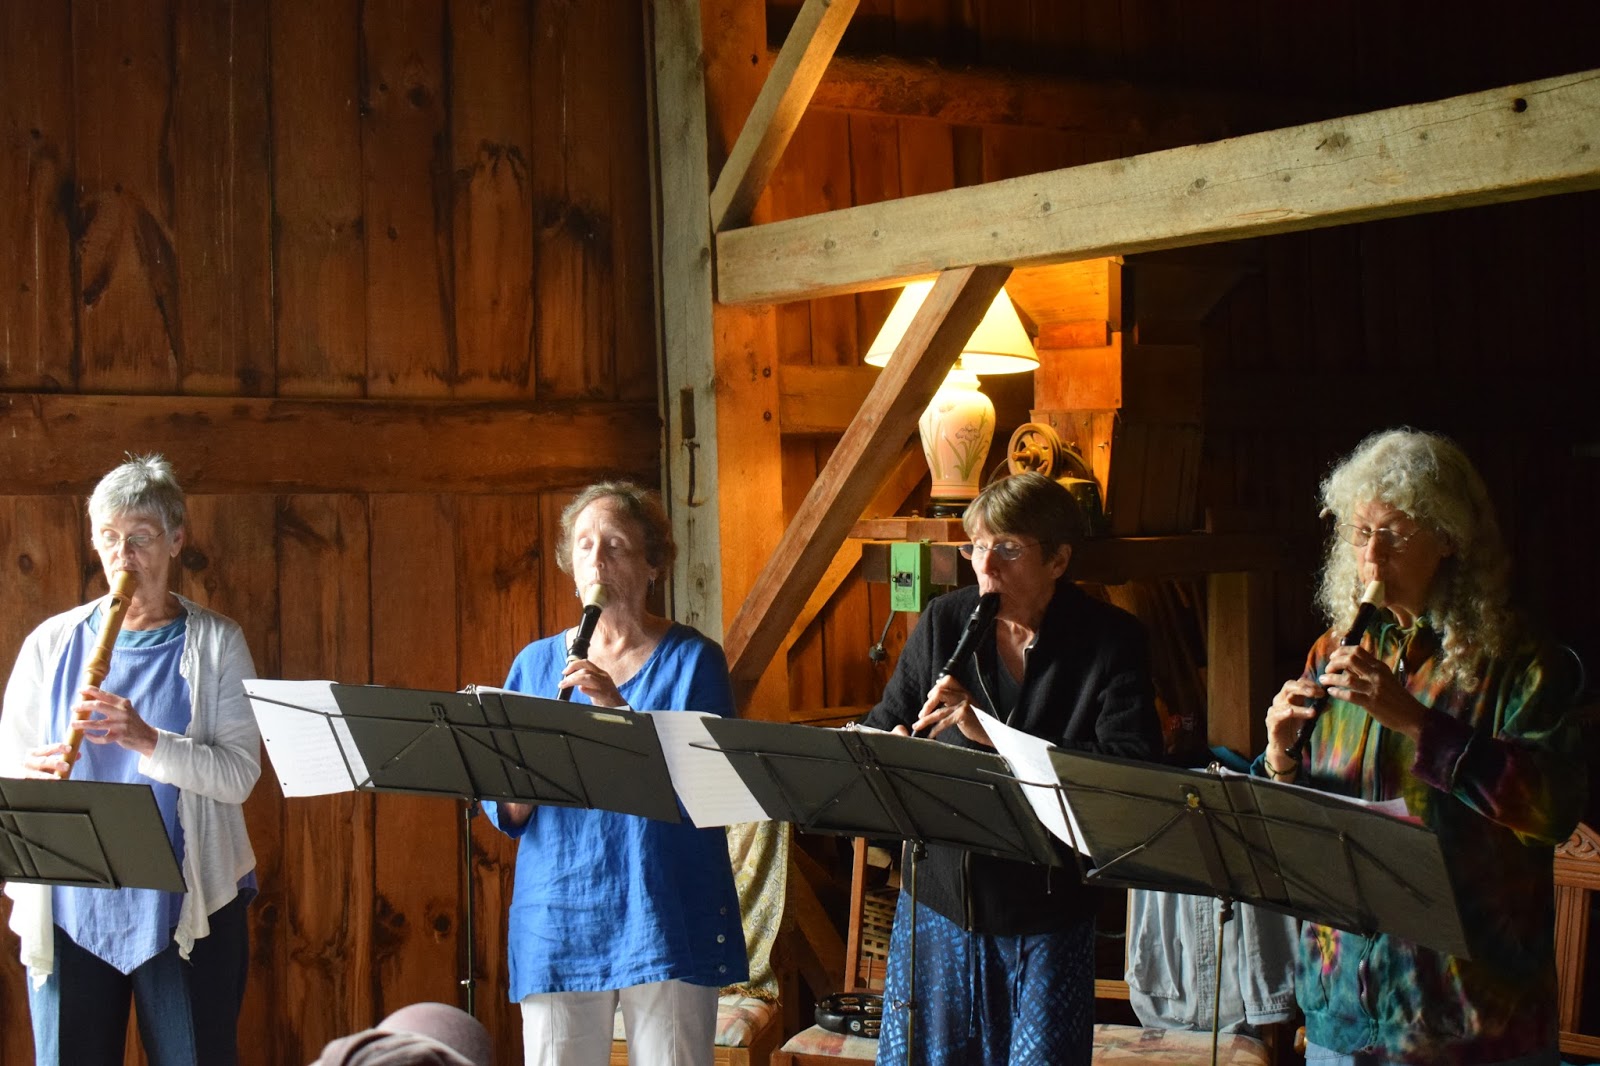 The merry players of the Full Circle Recorder ensemble perform at VFF’s annual Woodwinds in the Middle Barn gathering.